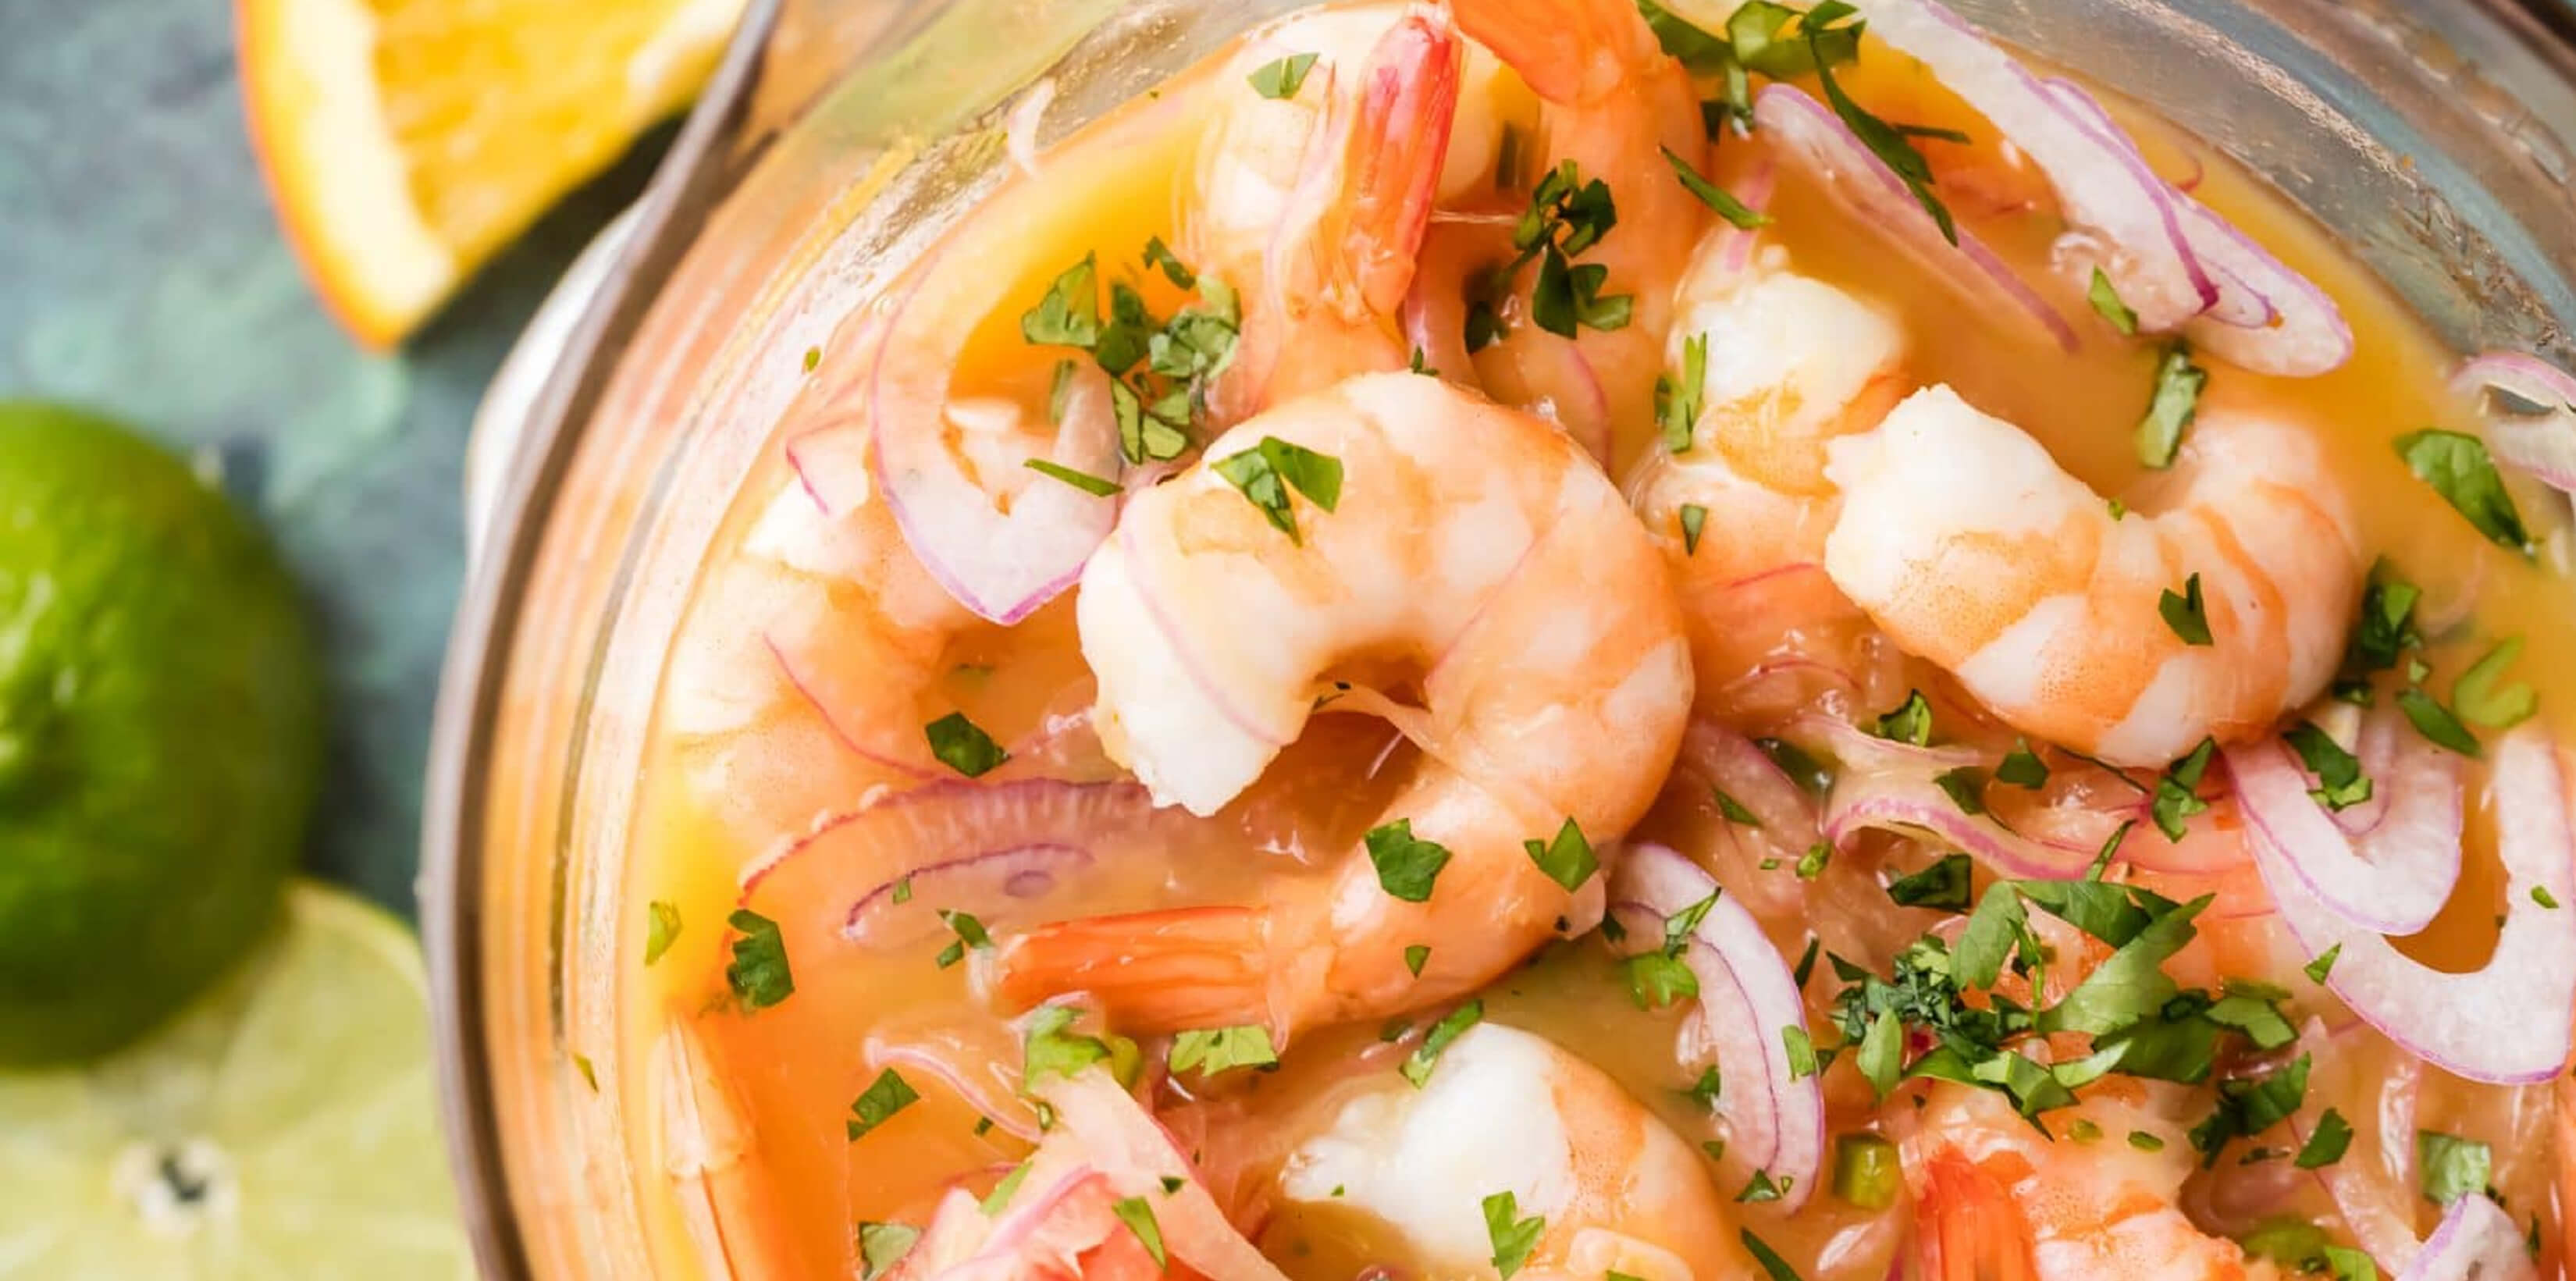 Simple, delicious and low carb! Get back on track with the delicious Shrimp Ceviche recipe.